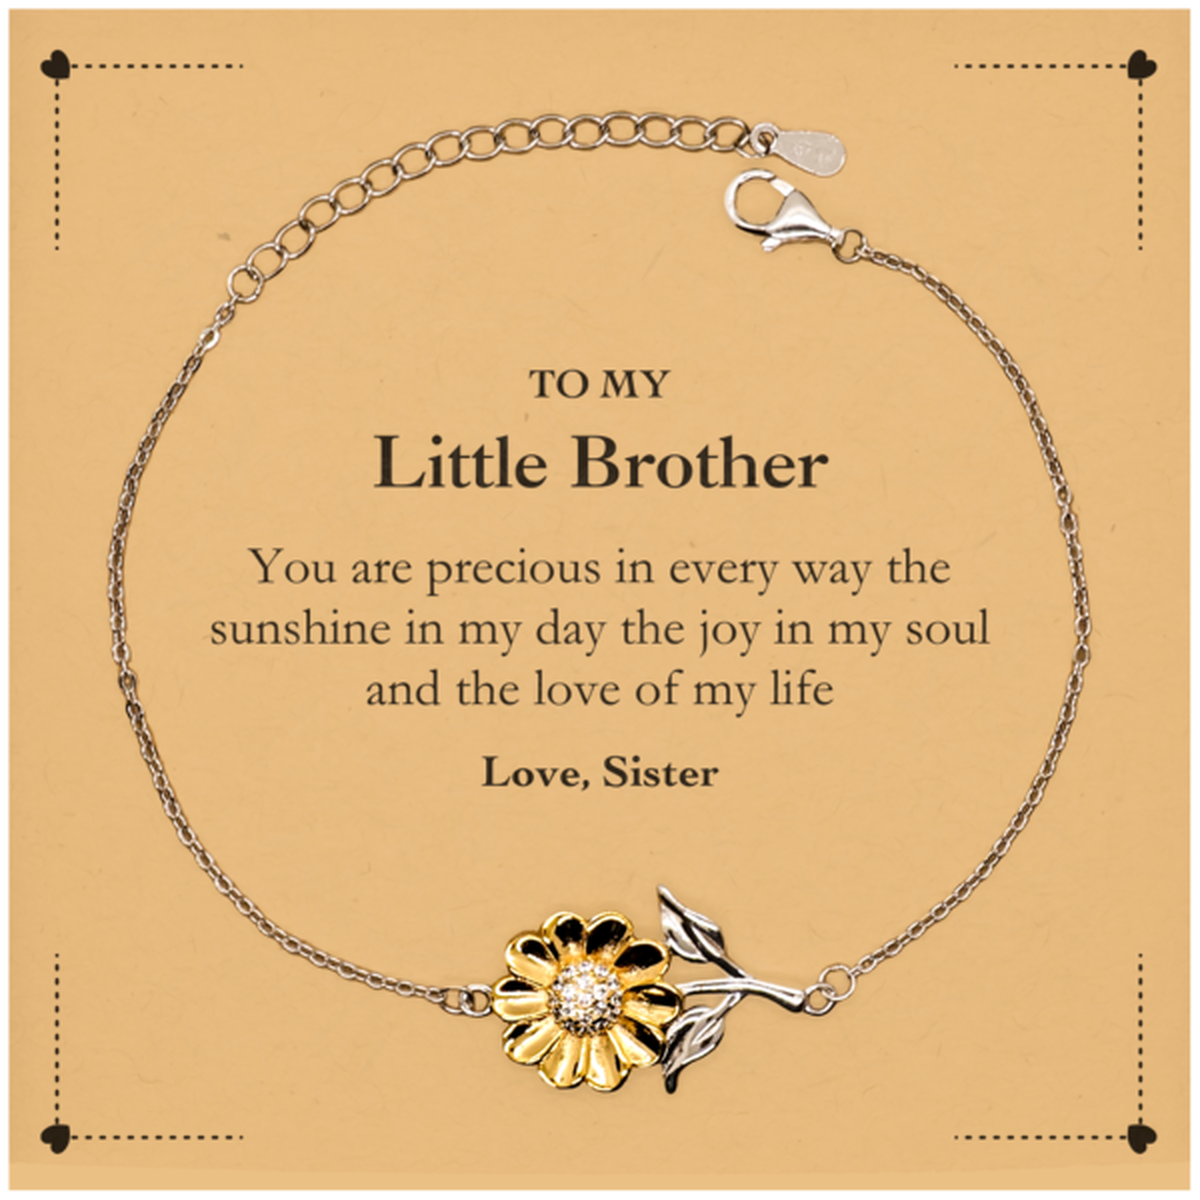 Graduation Gifts for Little Brother Sunflower Bracelet Present from Sister, Christmas Little Brother Birthday Gifts Little Brother You are precious in every way the sunshine in my day. Love, Sister